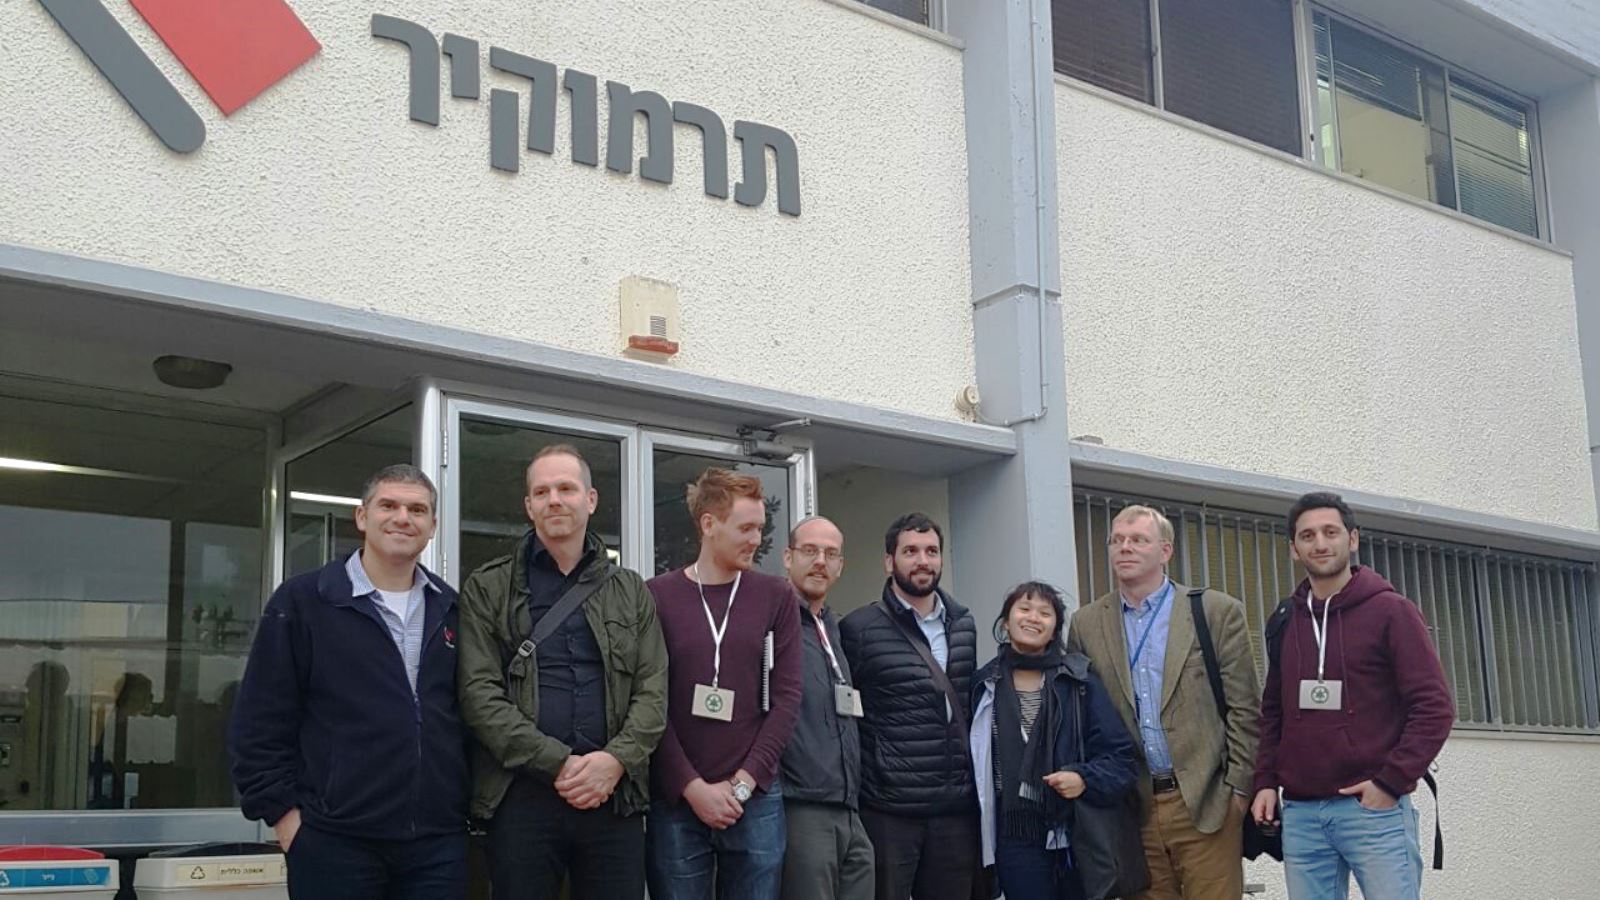 Participants in Israel’s first CSR conference visiting Termokir, an Israeli maker of thermal plaster. Photo courtesy of Maala